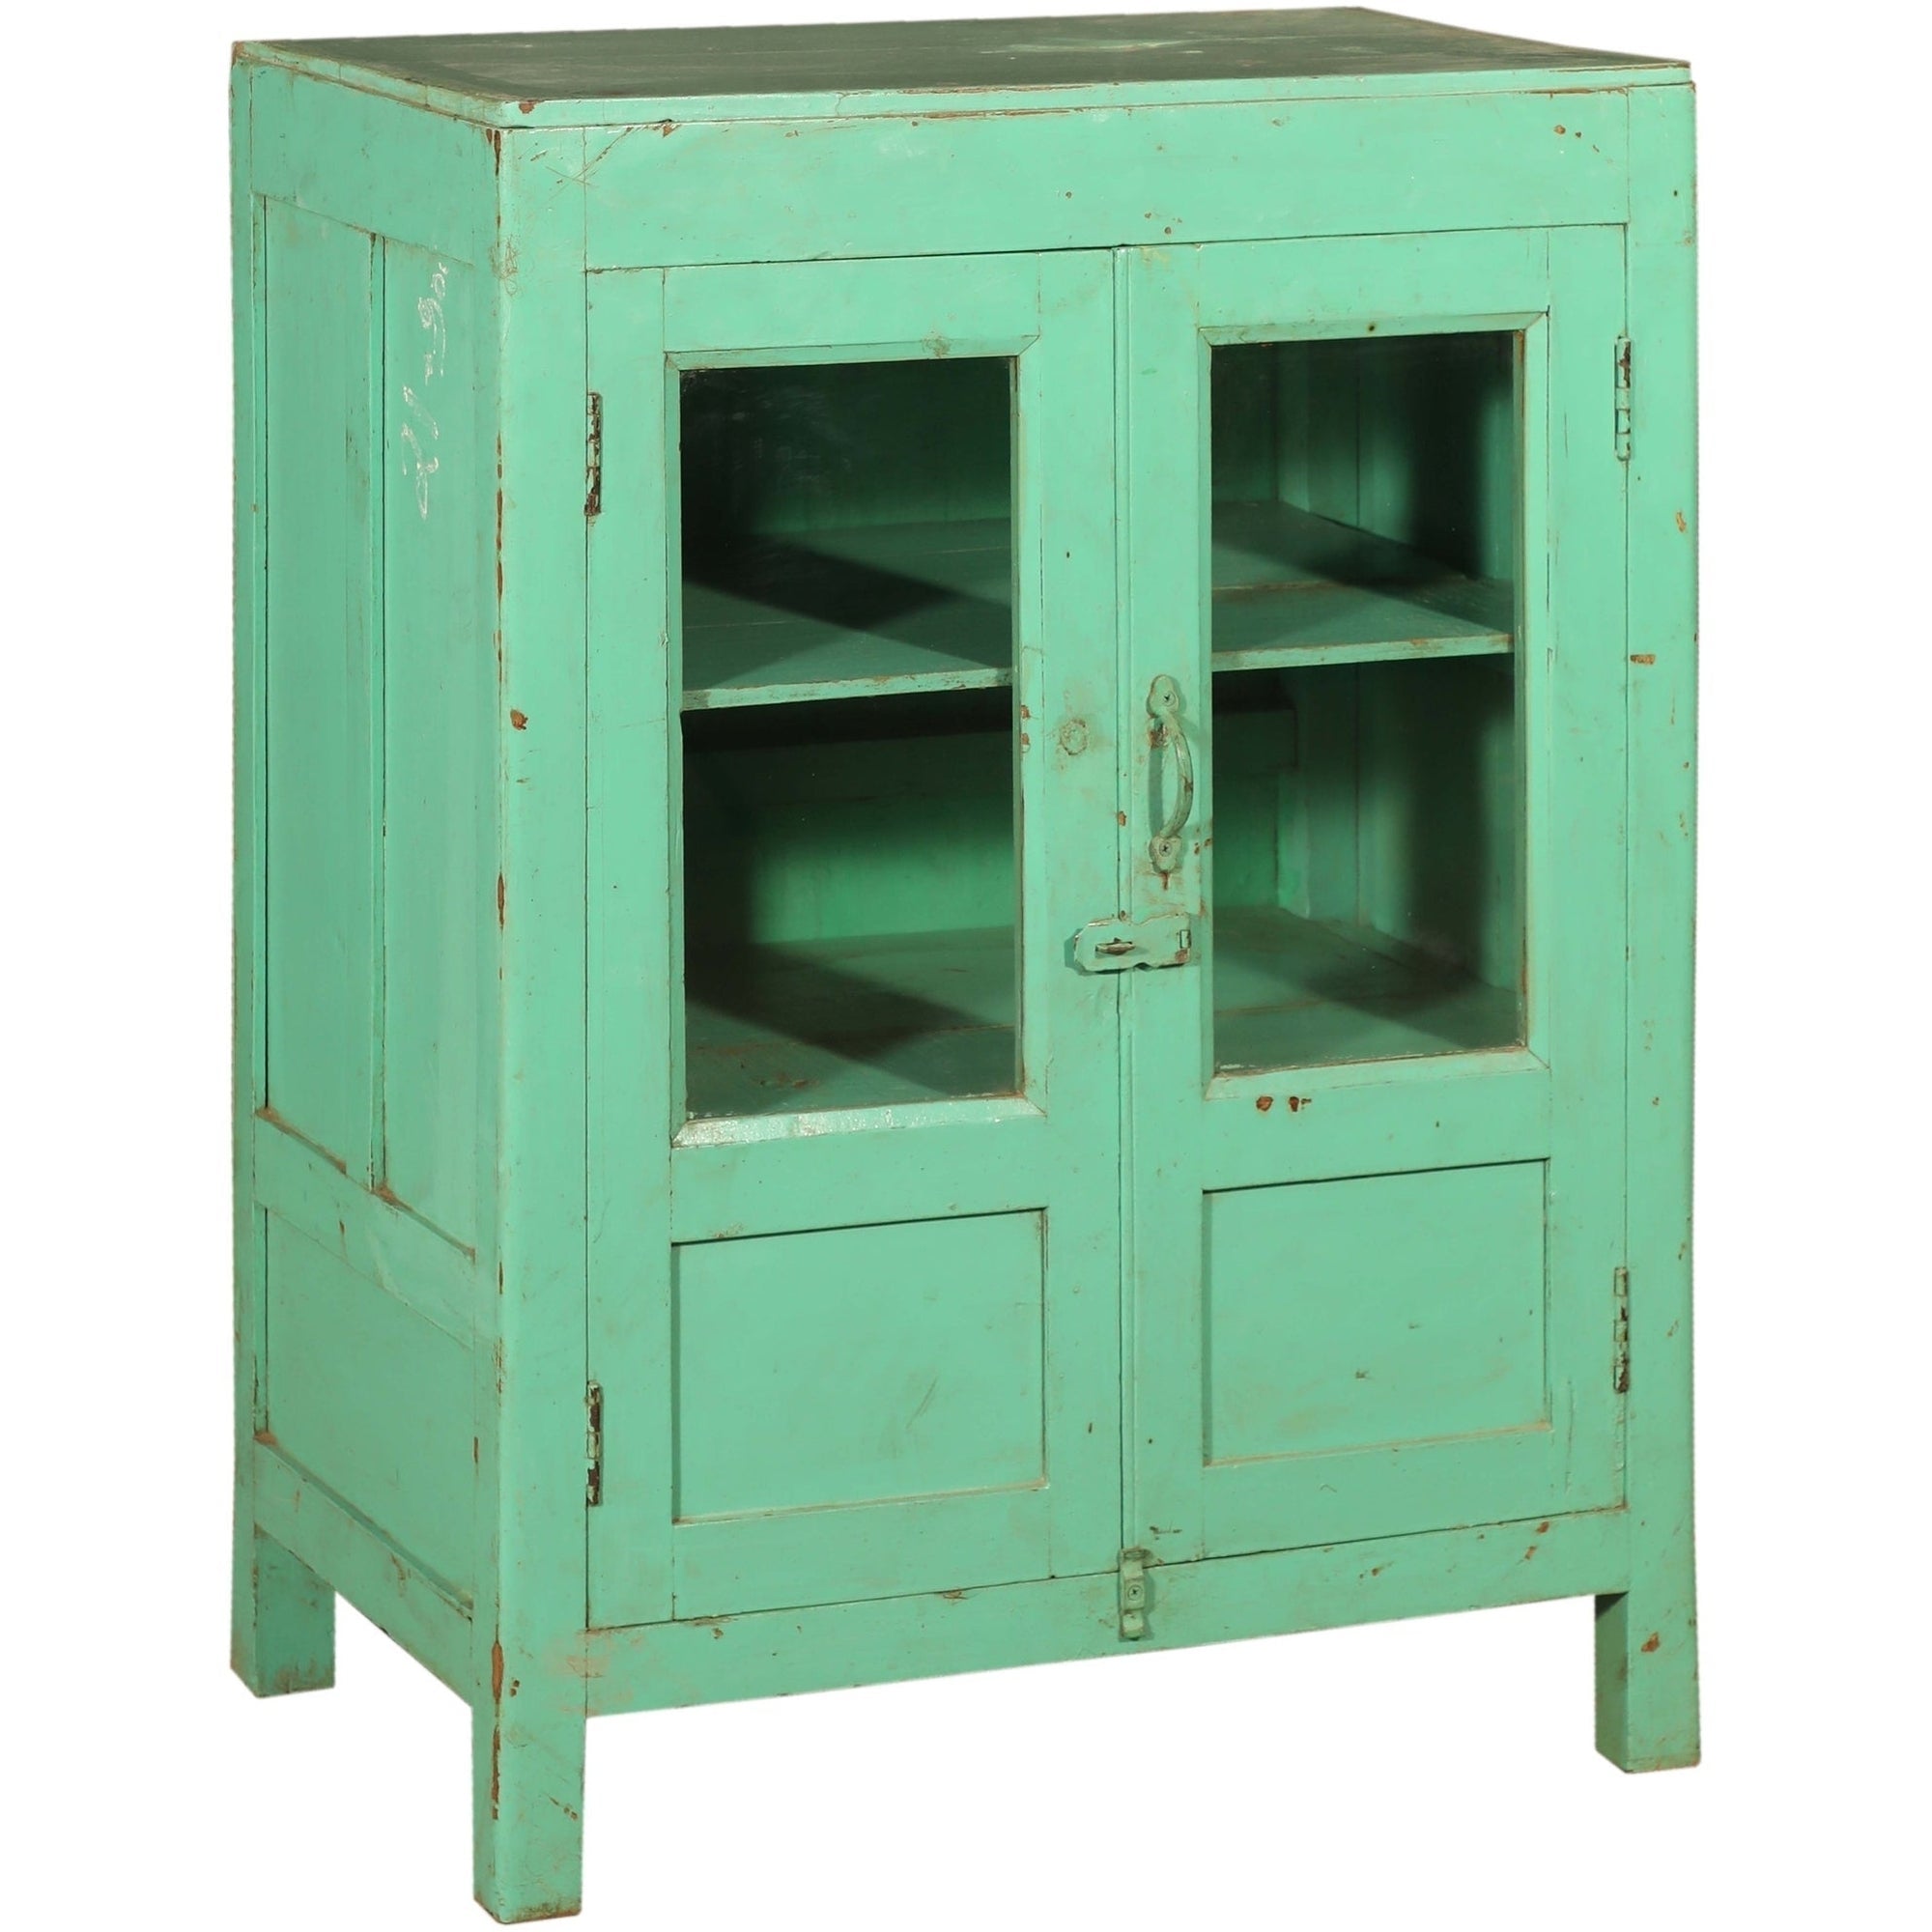 RM-054099, Wooden Cabinet With Glass, Teak, 50+Yrs Old - iDekor8